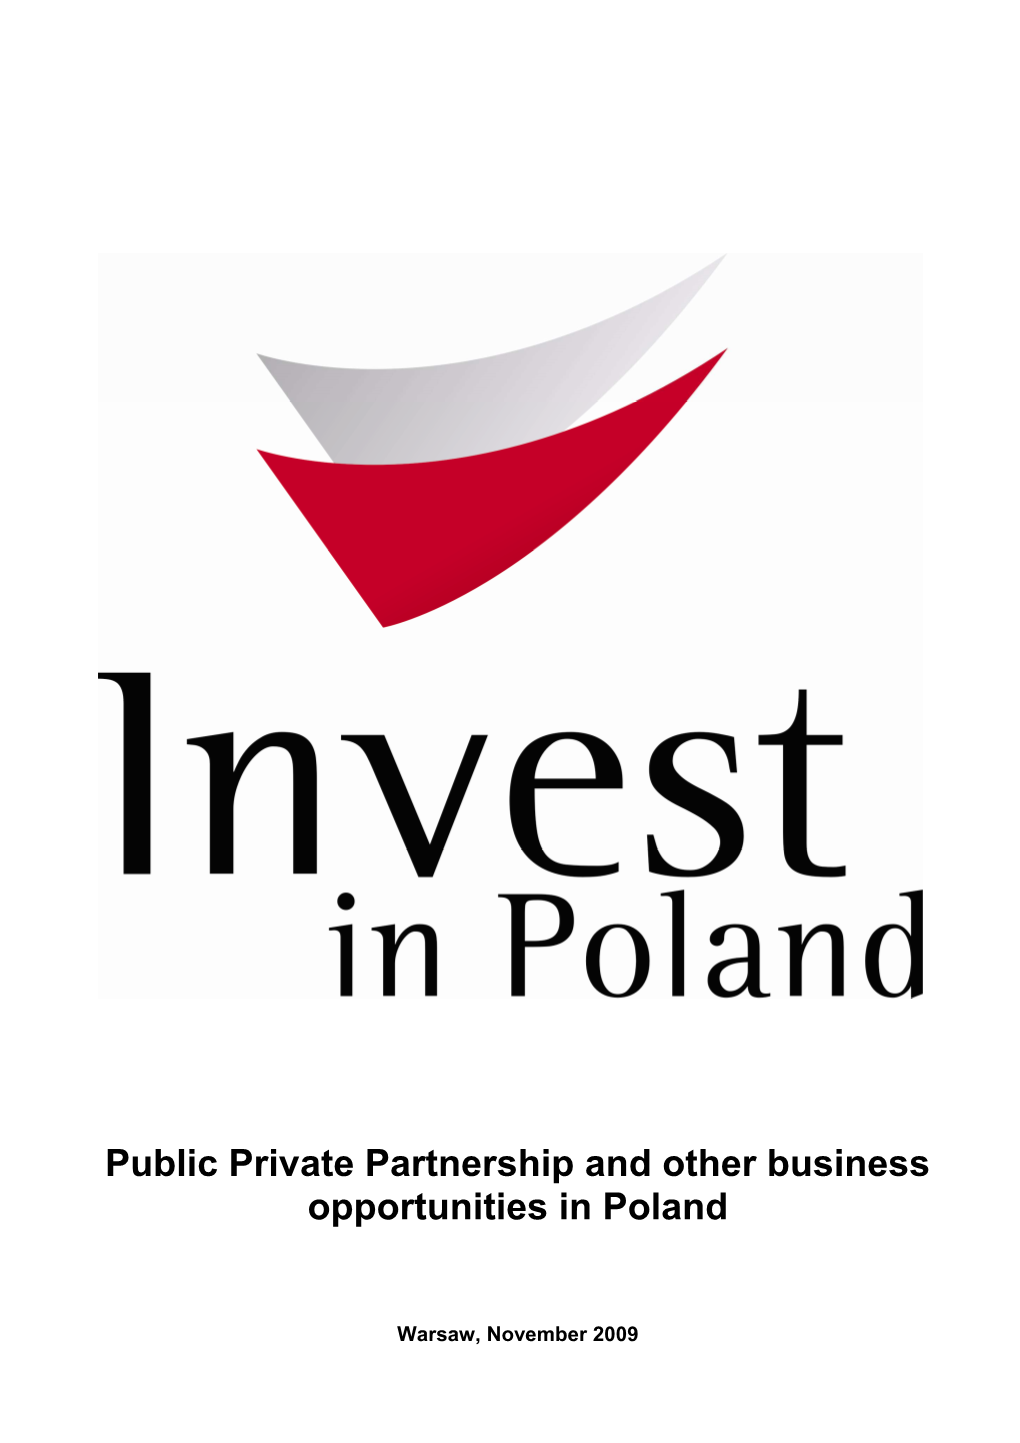 Public Private Partnership and Other Business Opportunities in Poland